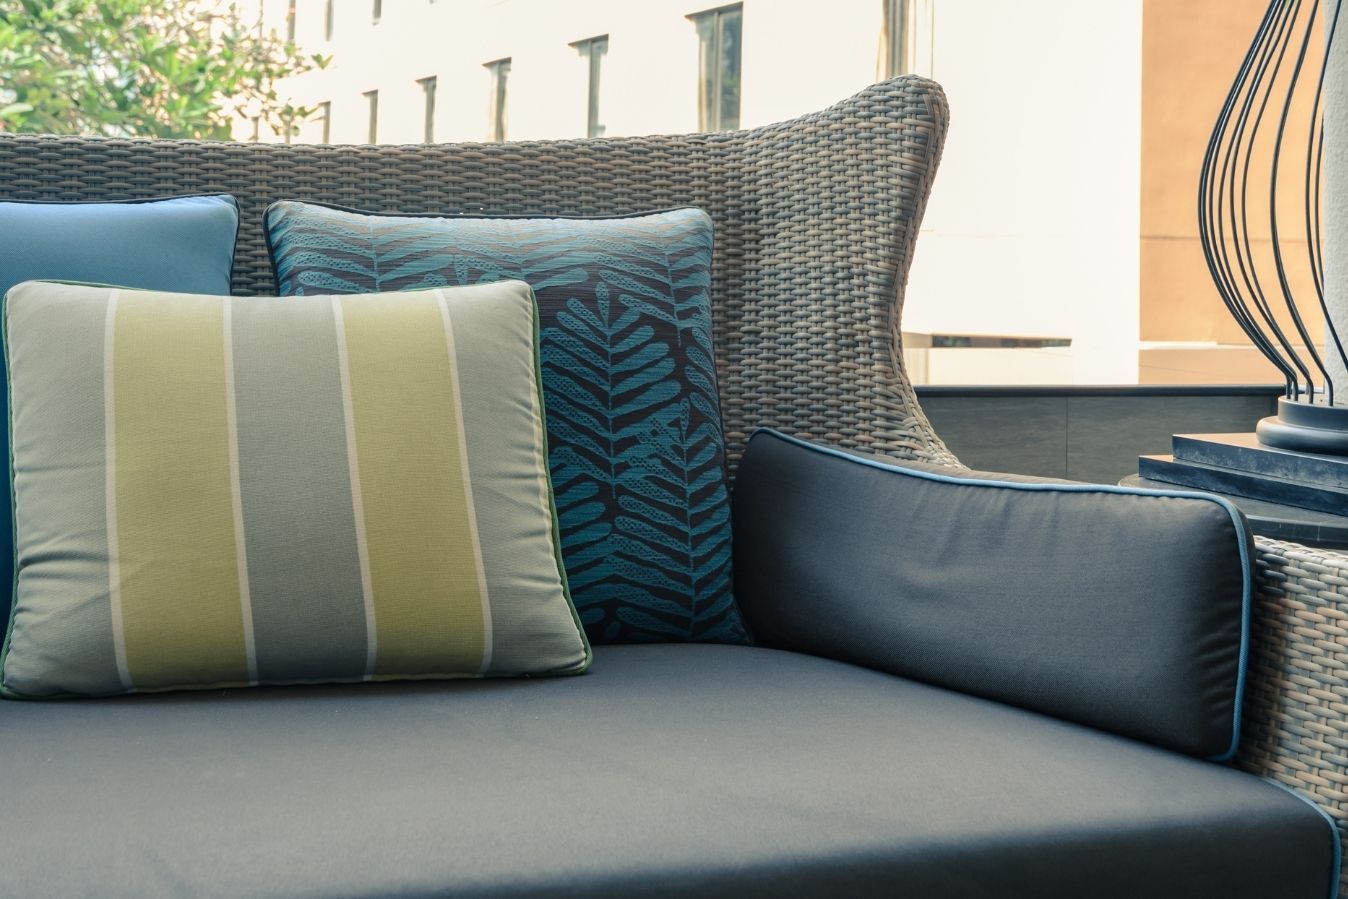 How To Choose the Best Outdoor Fabric